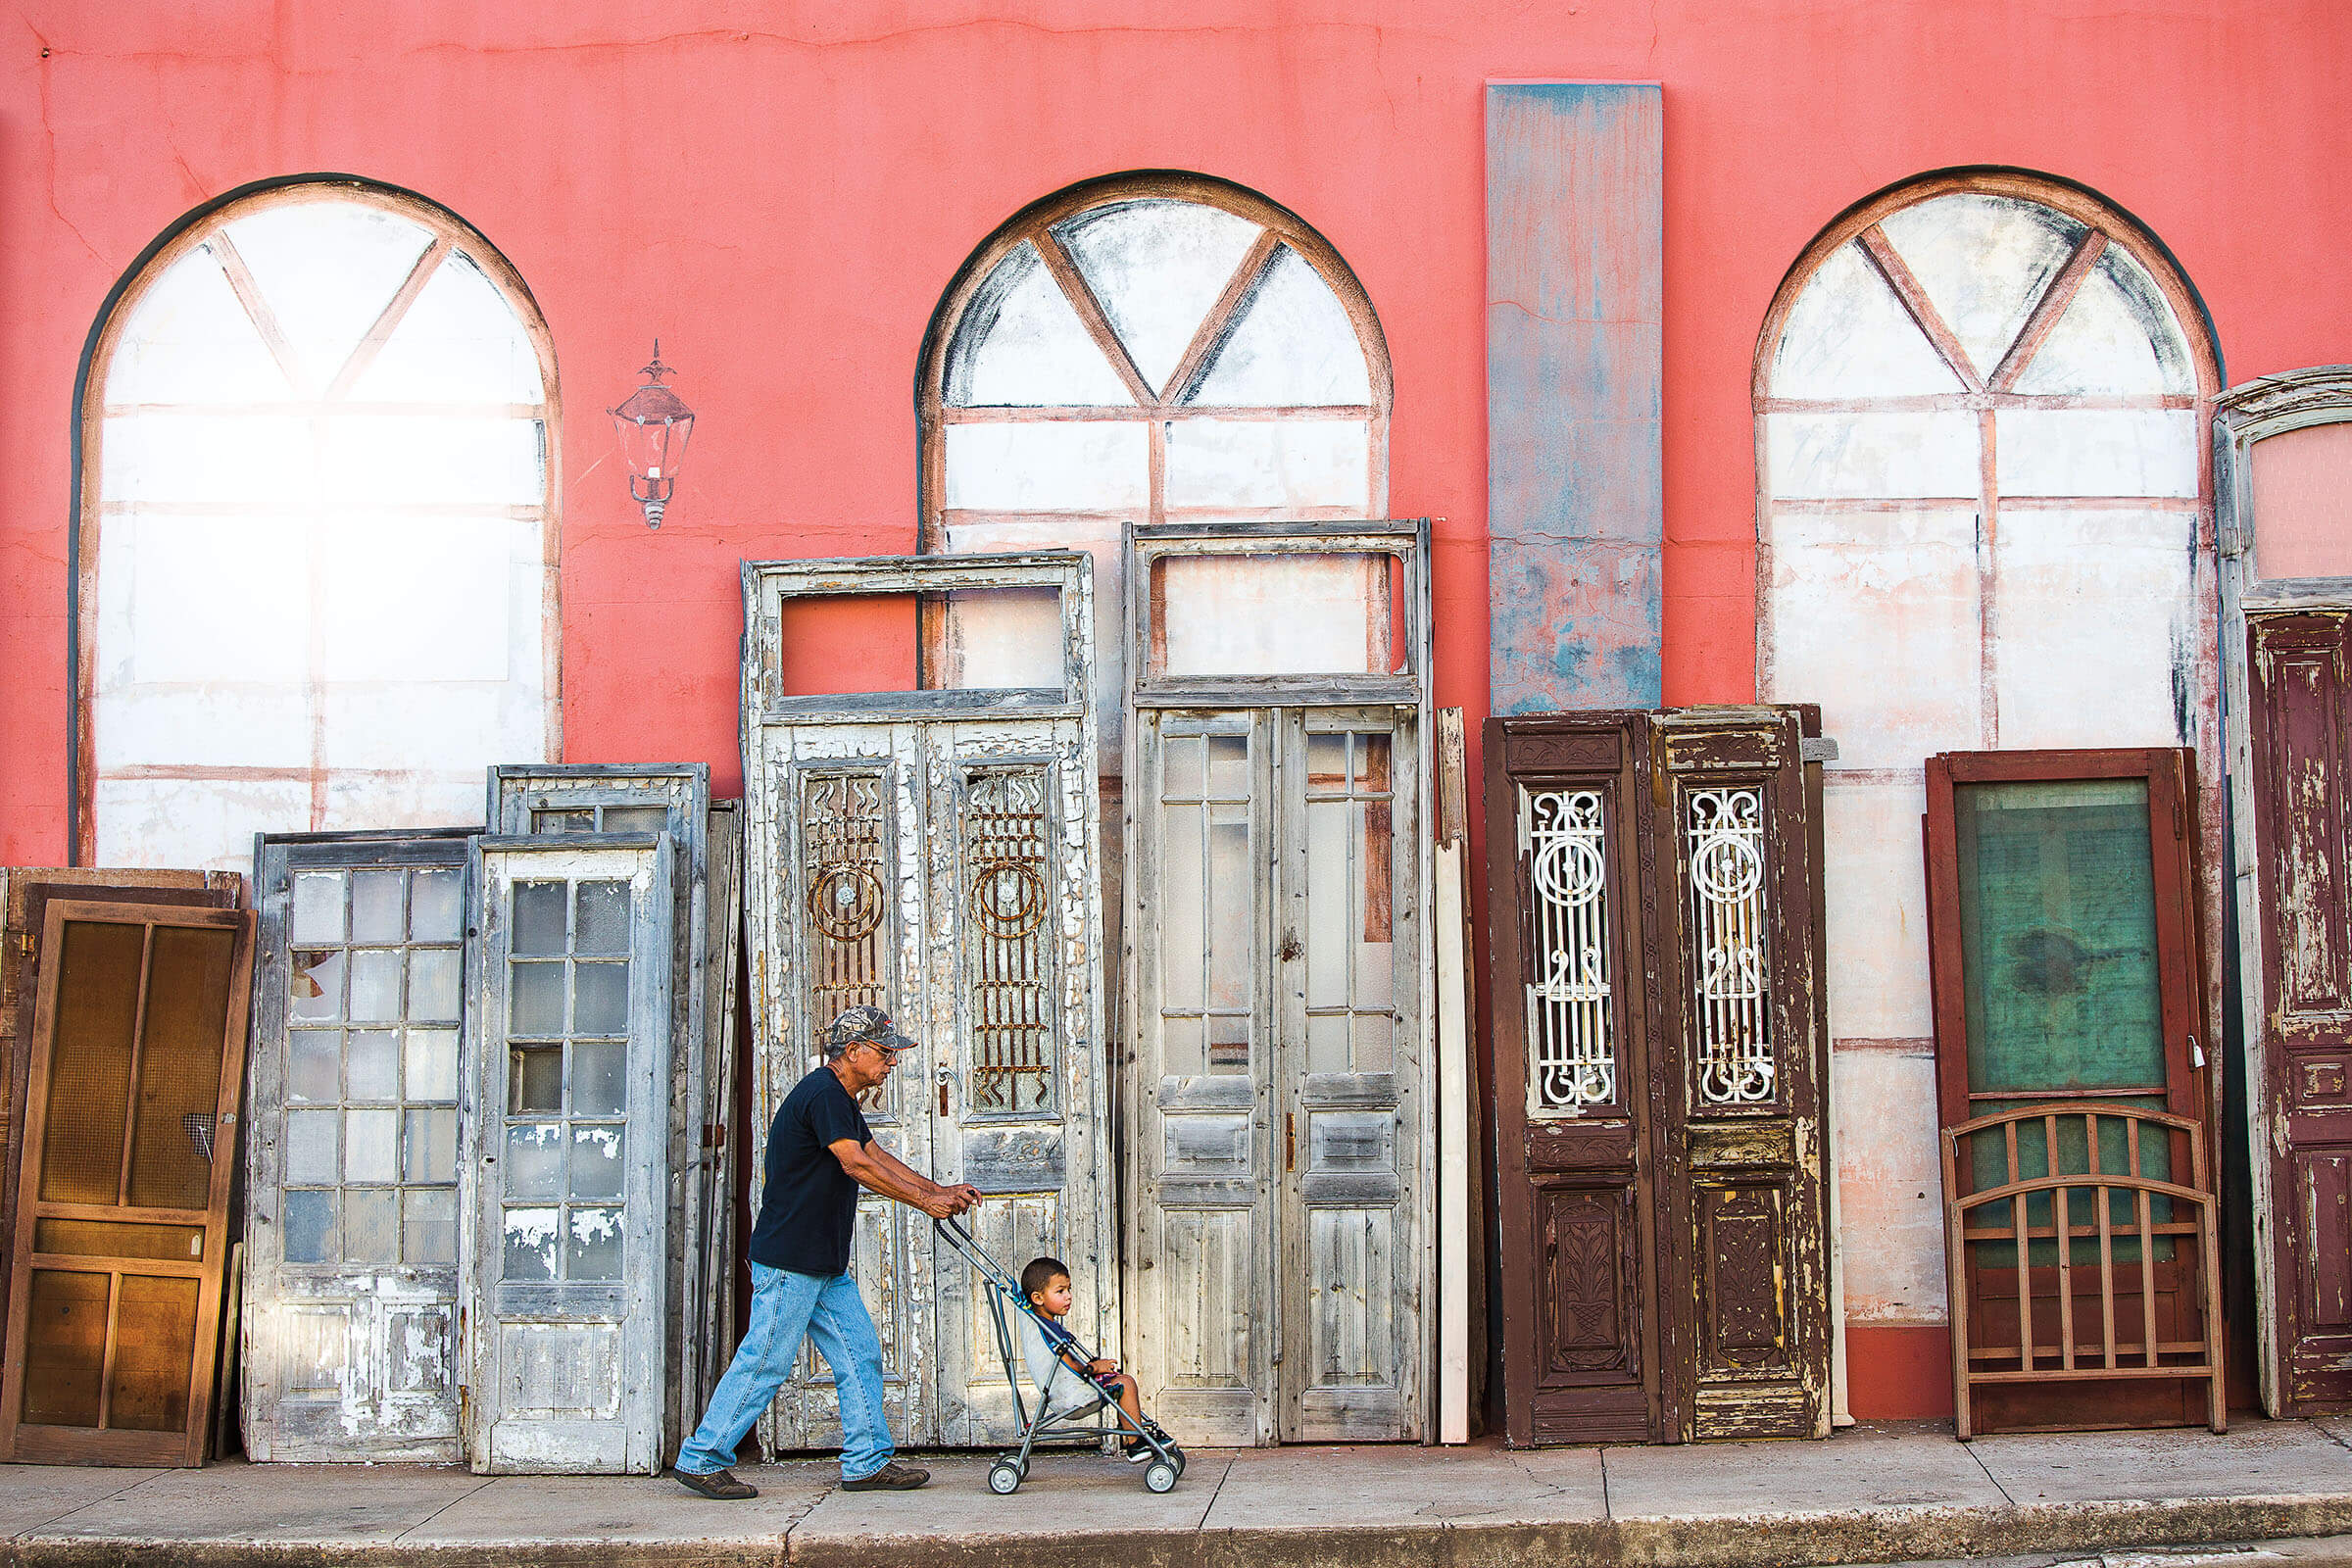 A man pushes a stroller in front of a pink wall with several antique doors in front in Brenham Texas